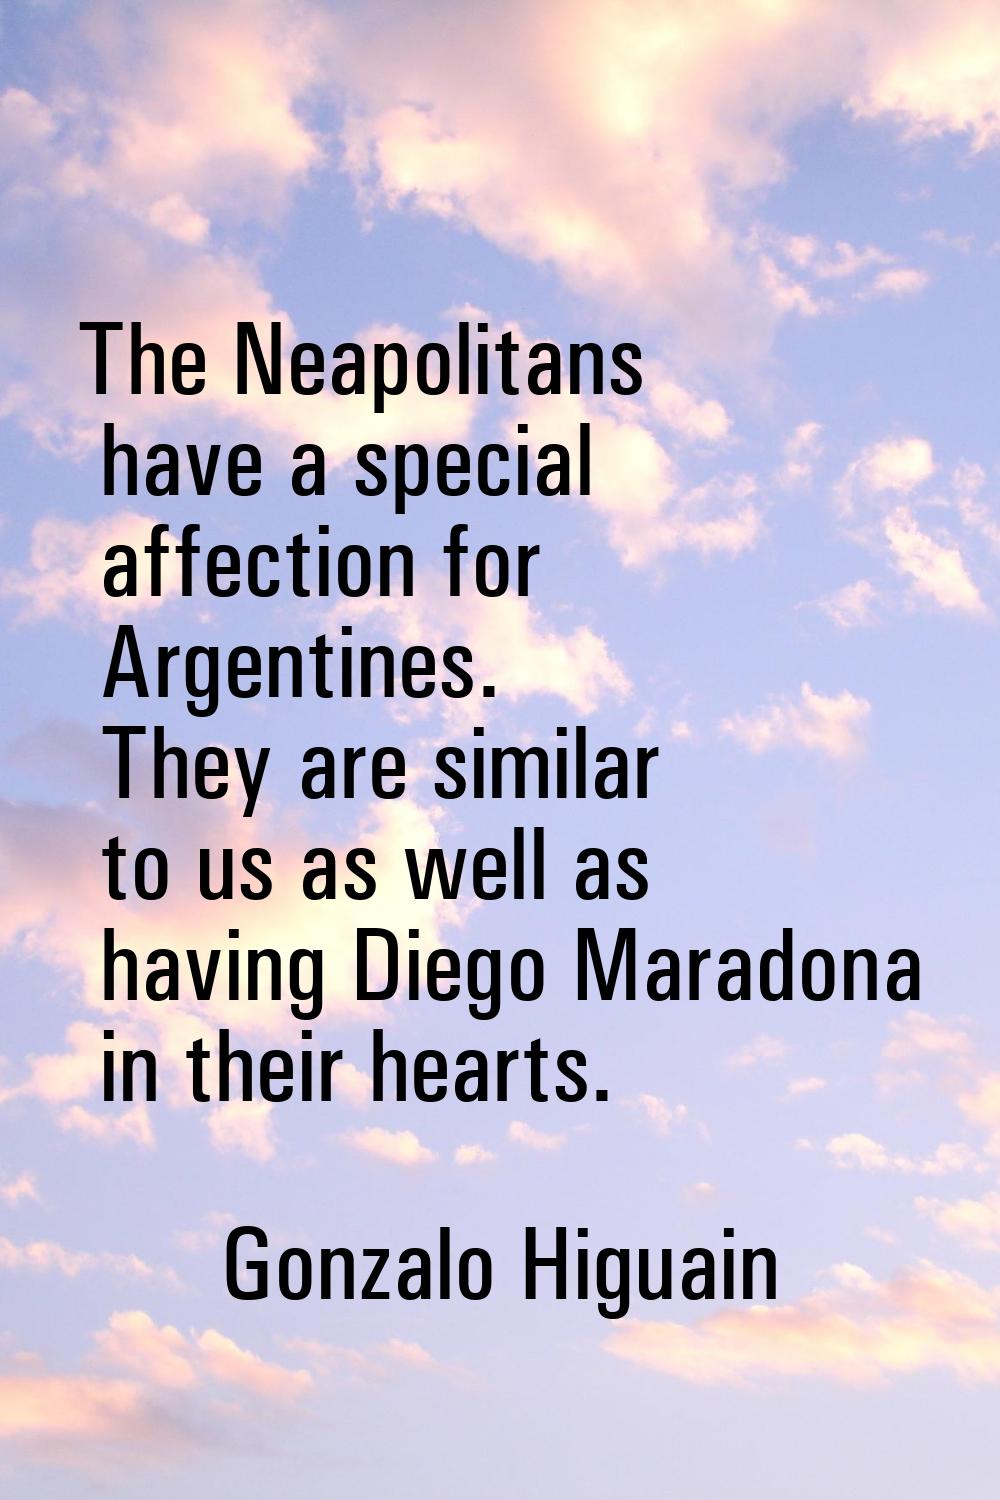 The Neapolitans have a special affection for Argentines. They are similar to us as well as having D